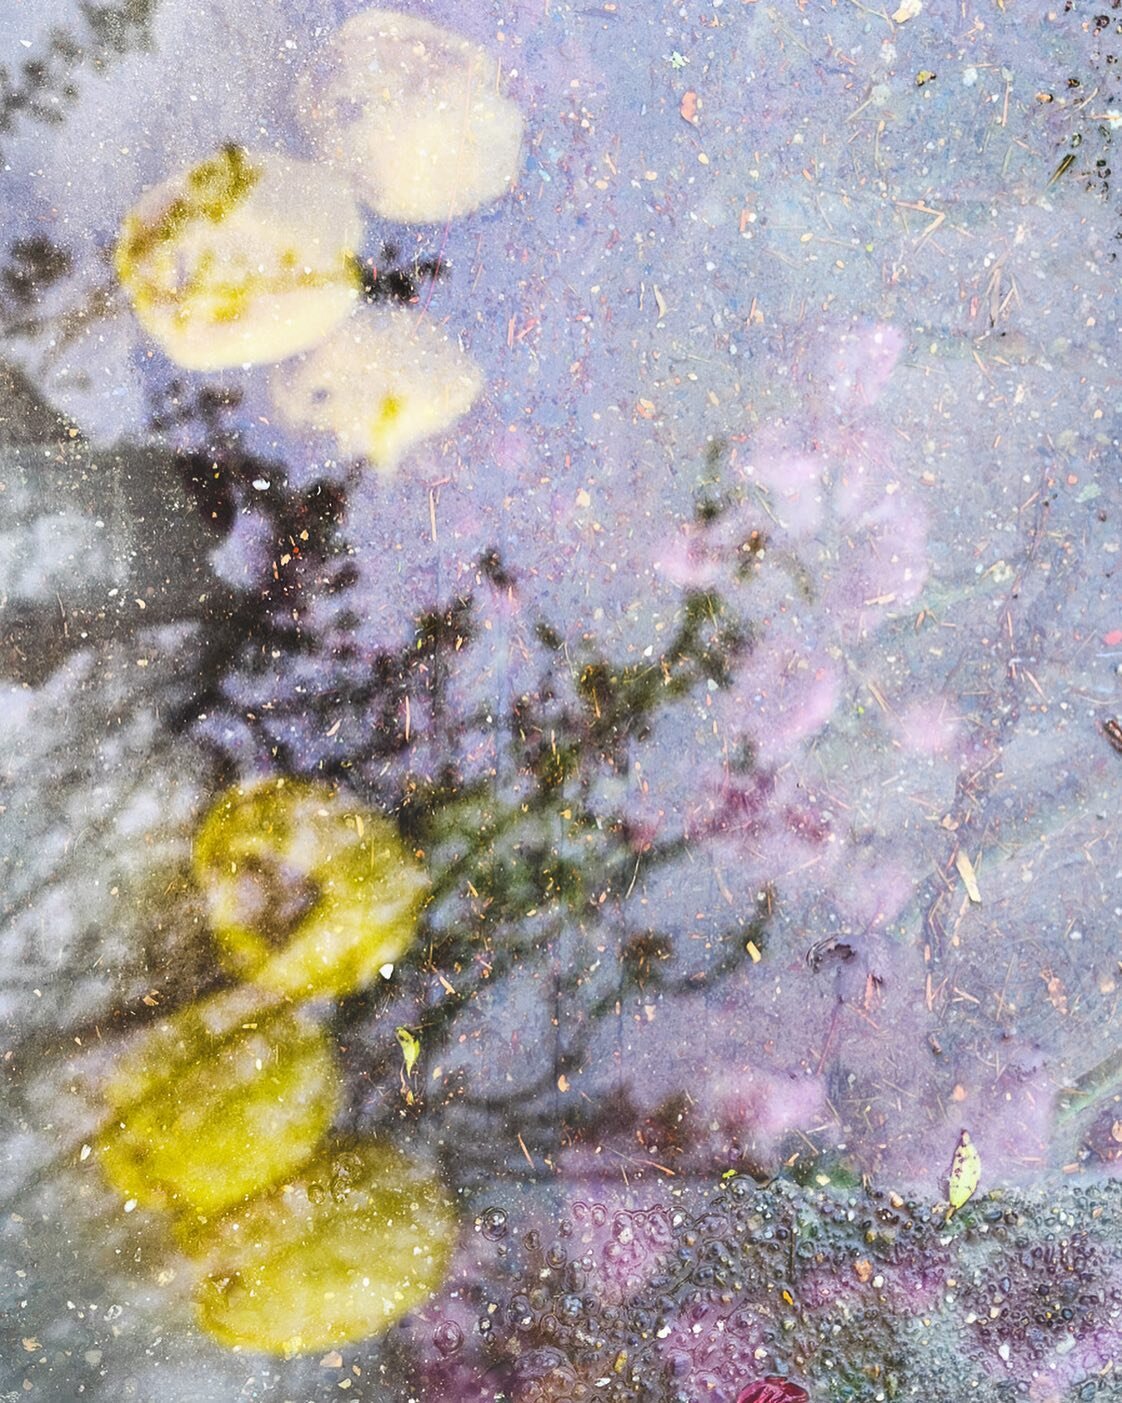 It might be spring, but it&rsquo;s still rainy around these parts. Couldn&rsquo;t resist these cheerful yellow tulips though. 💛

We are a group of artists who are experimenting with creating double exposures, fusing, blending and bringing a little m